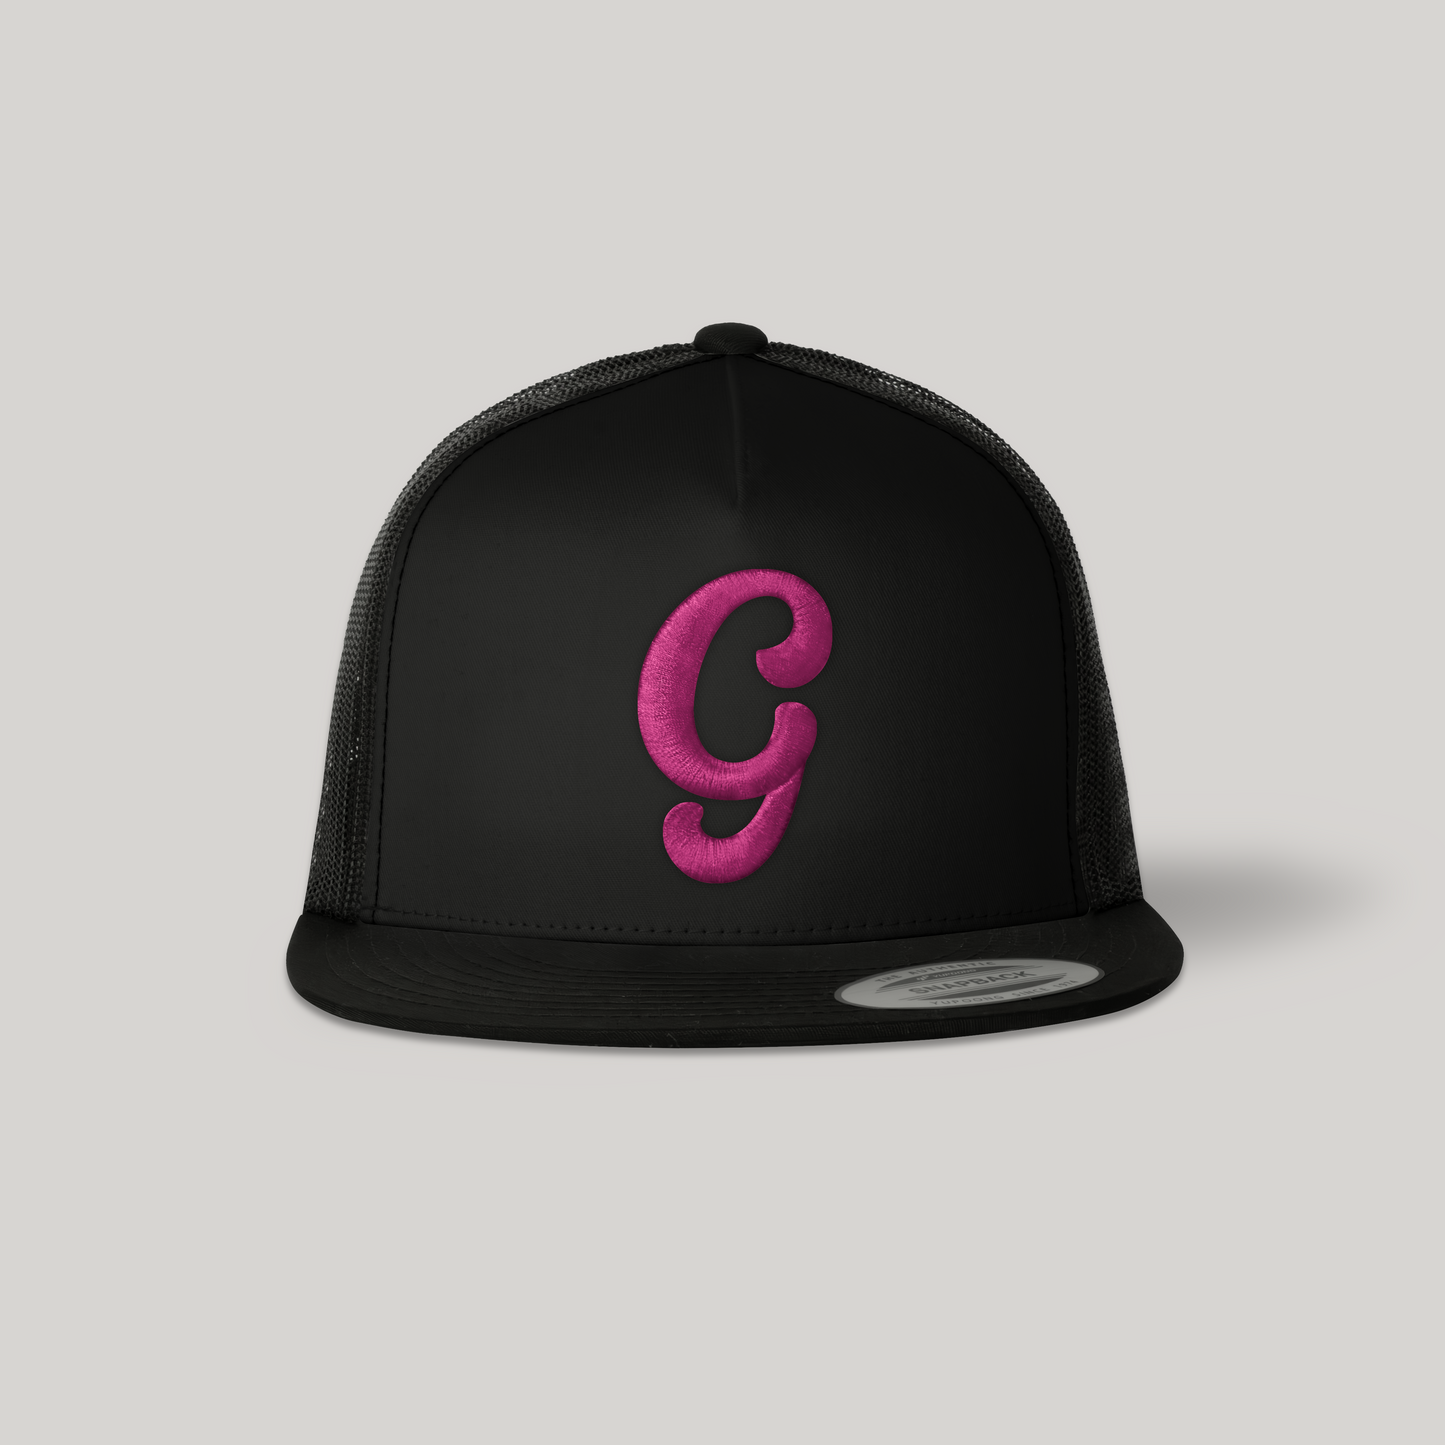 Classic Black With Pink G Hat